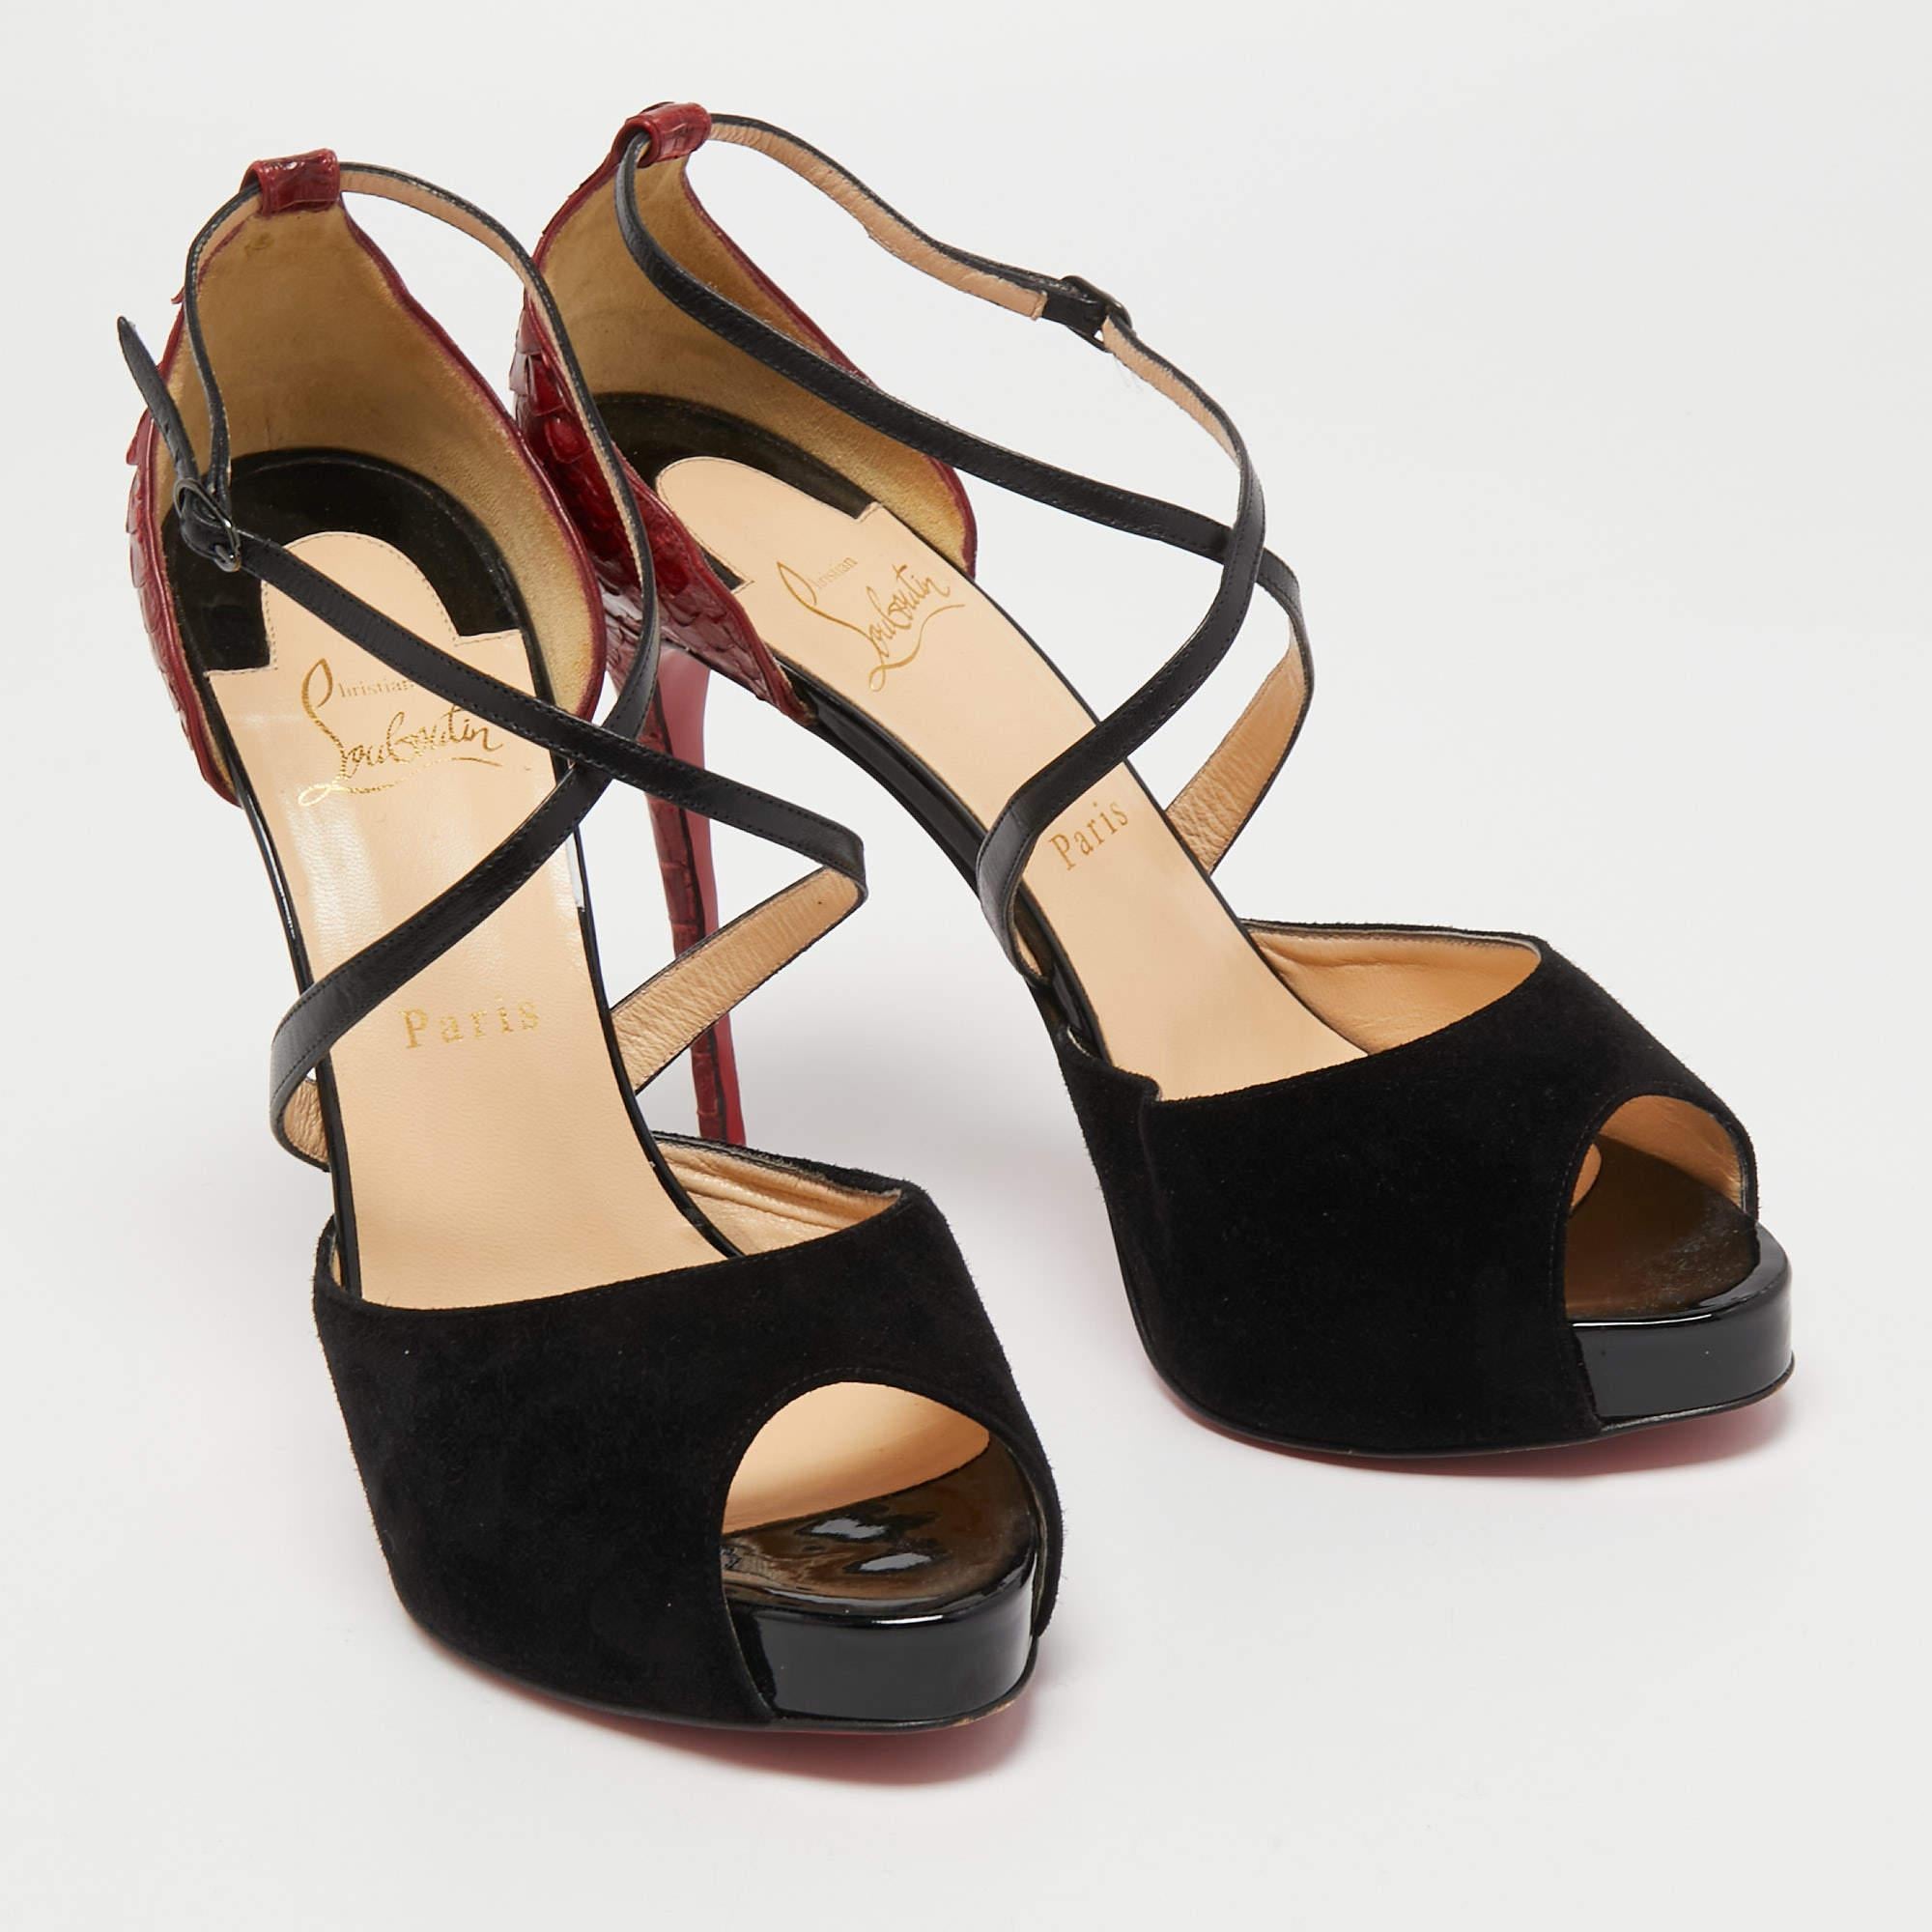 Women's Christian Louboutin Black/Dark Red Leather, Suede and Python Cross Me Sandals Si For Sale